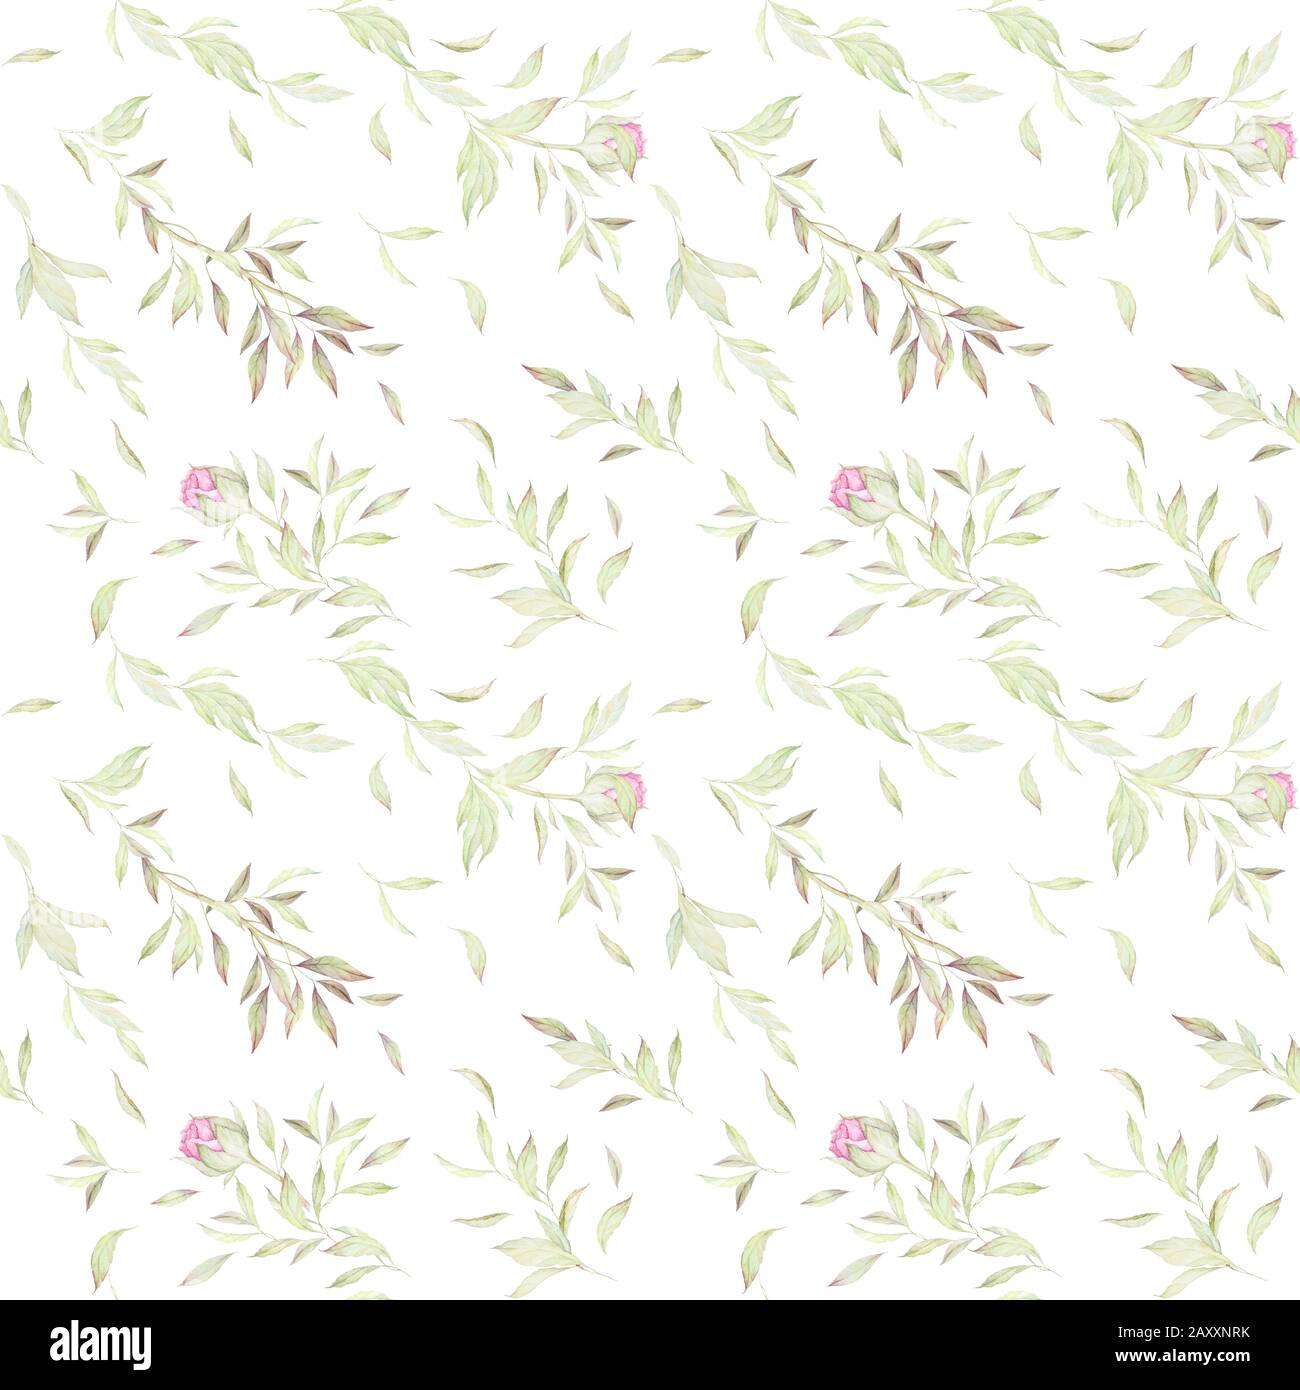 Seamless Floral Pattern. Luxury Pink Flowers. Lush Leaves. Watercolor Vintage  Peonies. Wedding Invitation Decor. Wall Art. White background. Stock Photo